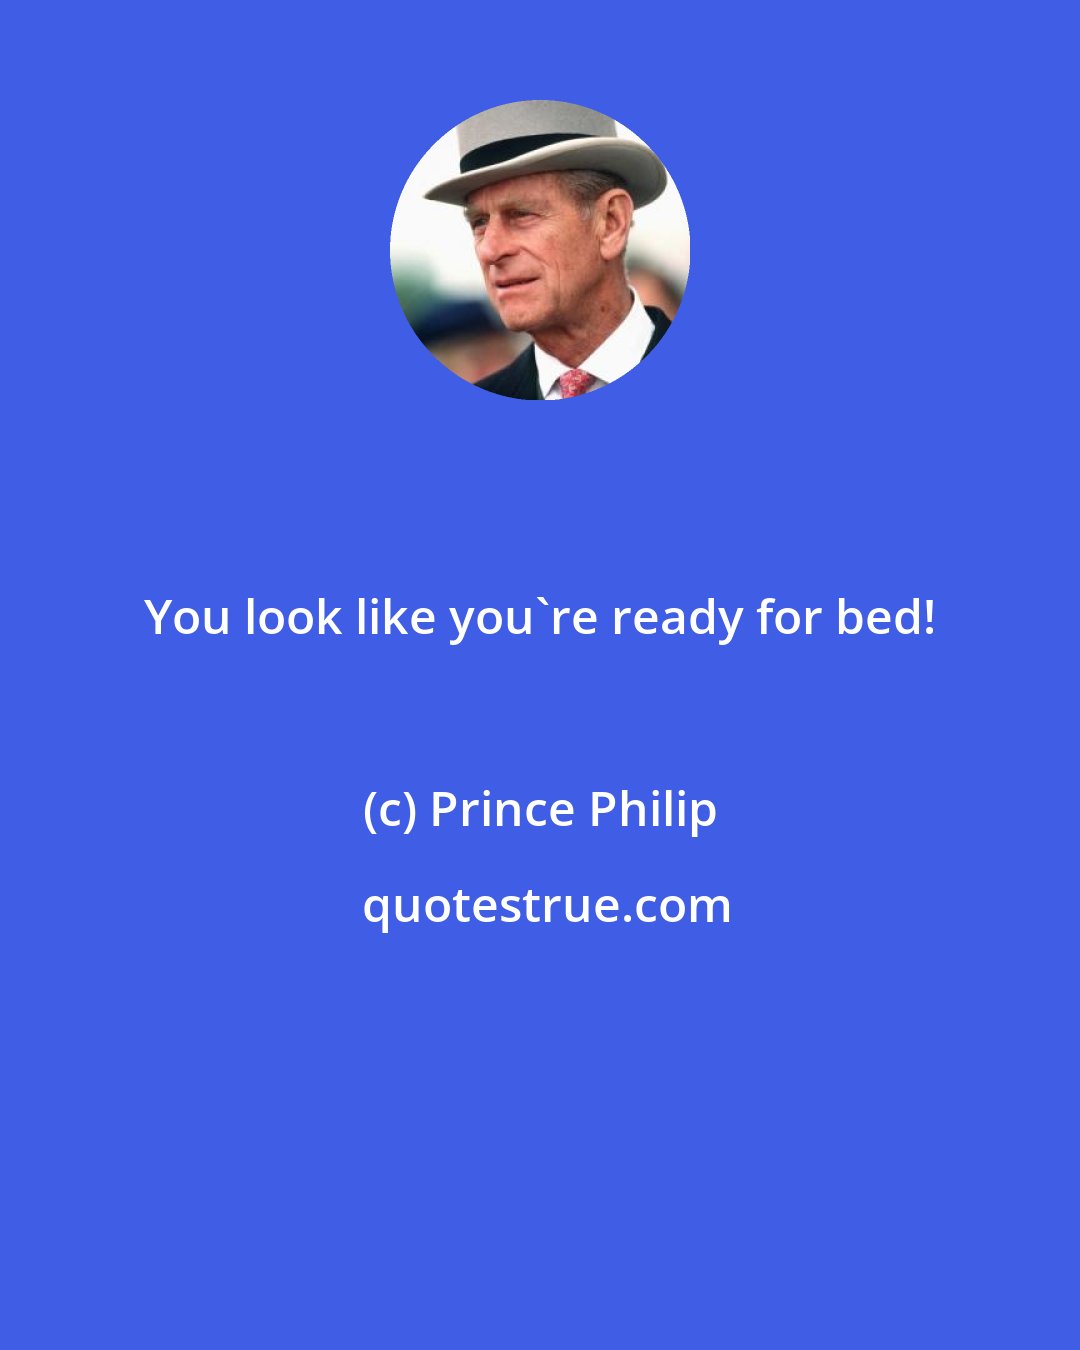 Prince Philip: You look like you're ready for bed!